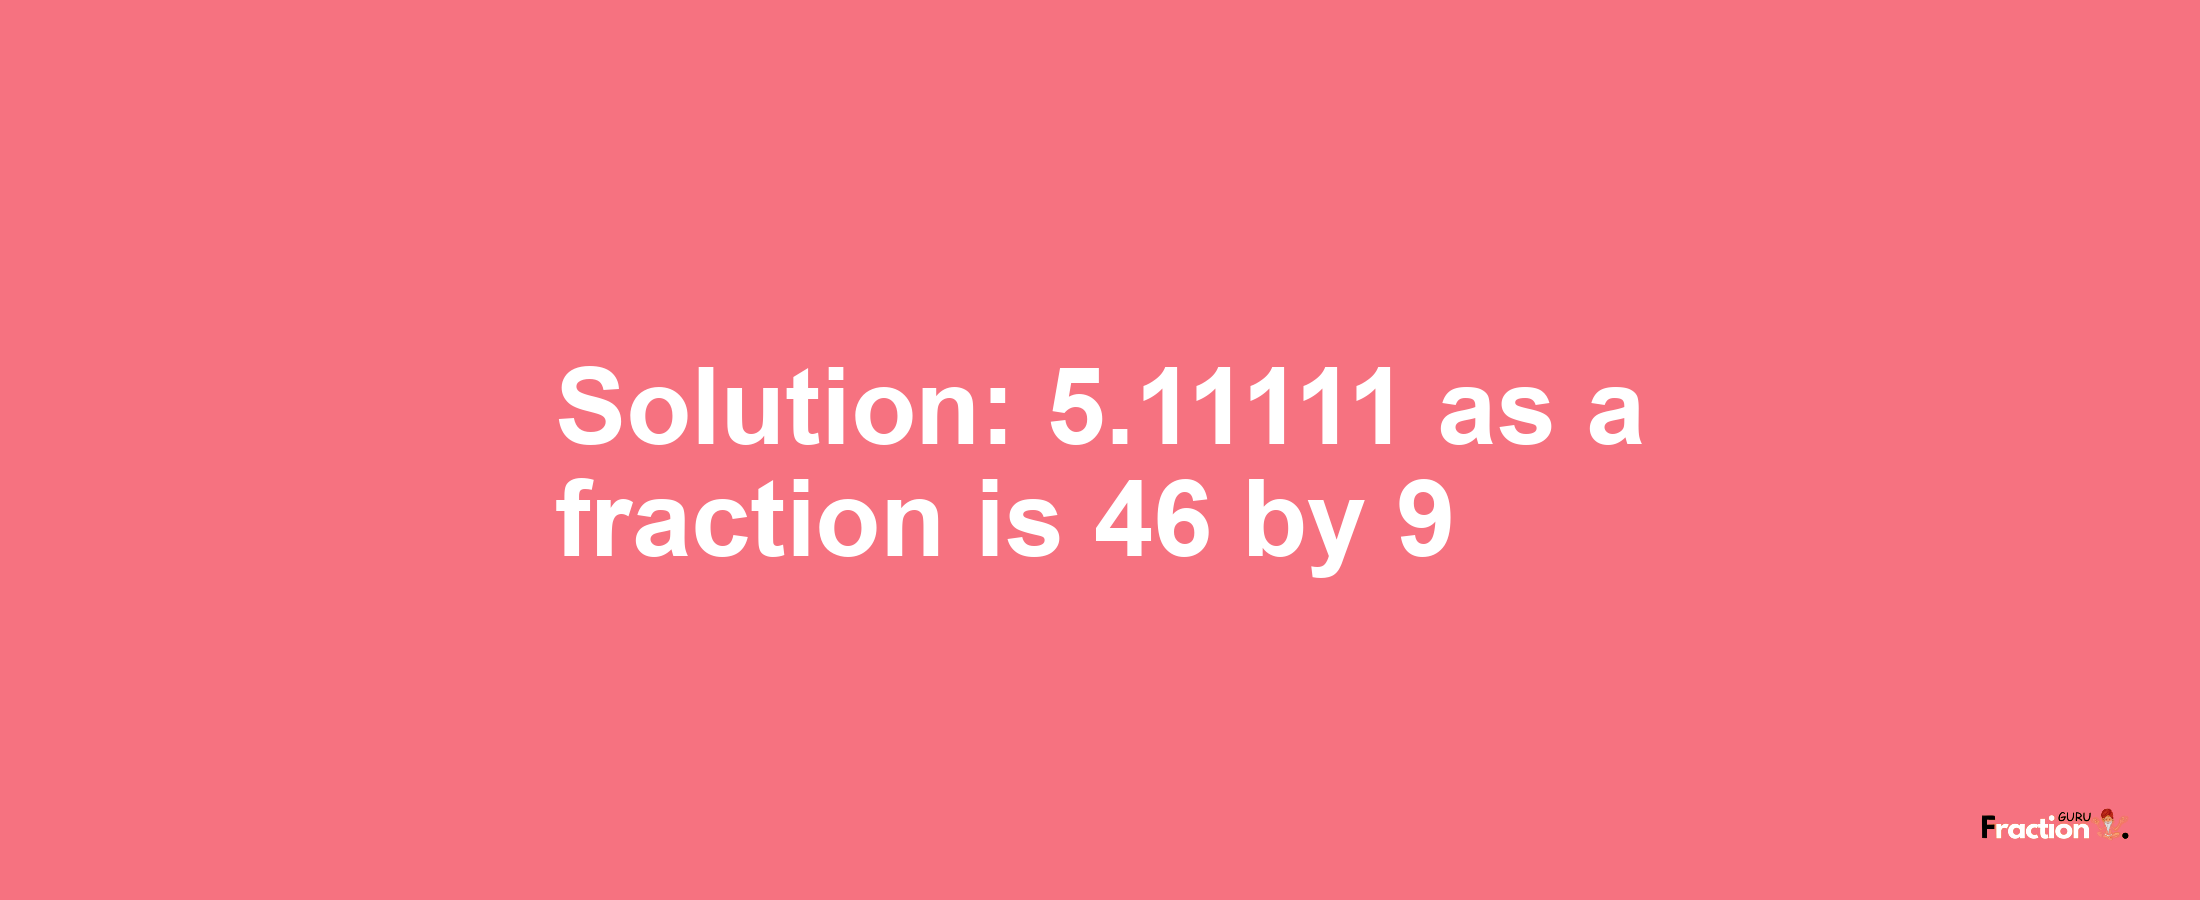 Solution:5.11111 as a fraction is 46/9